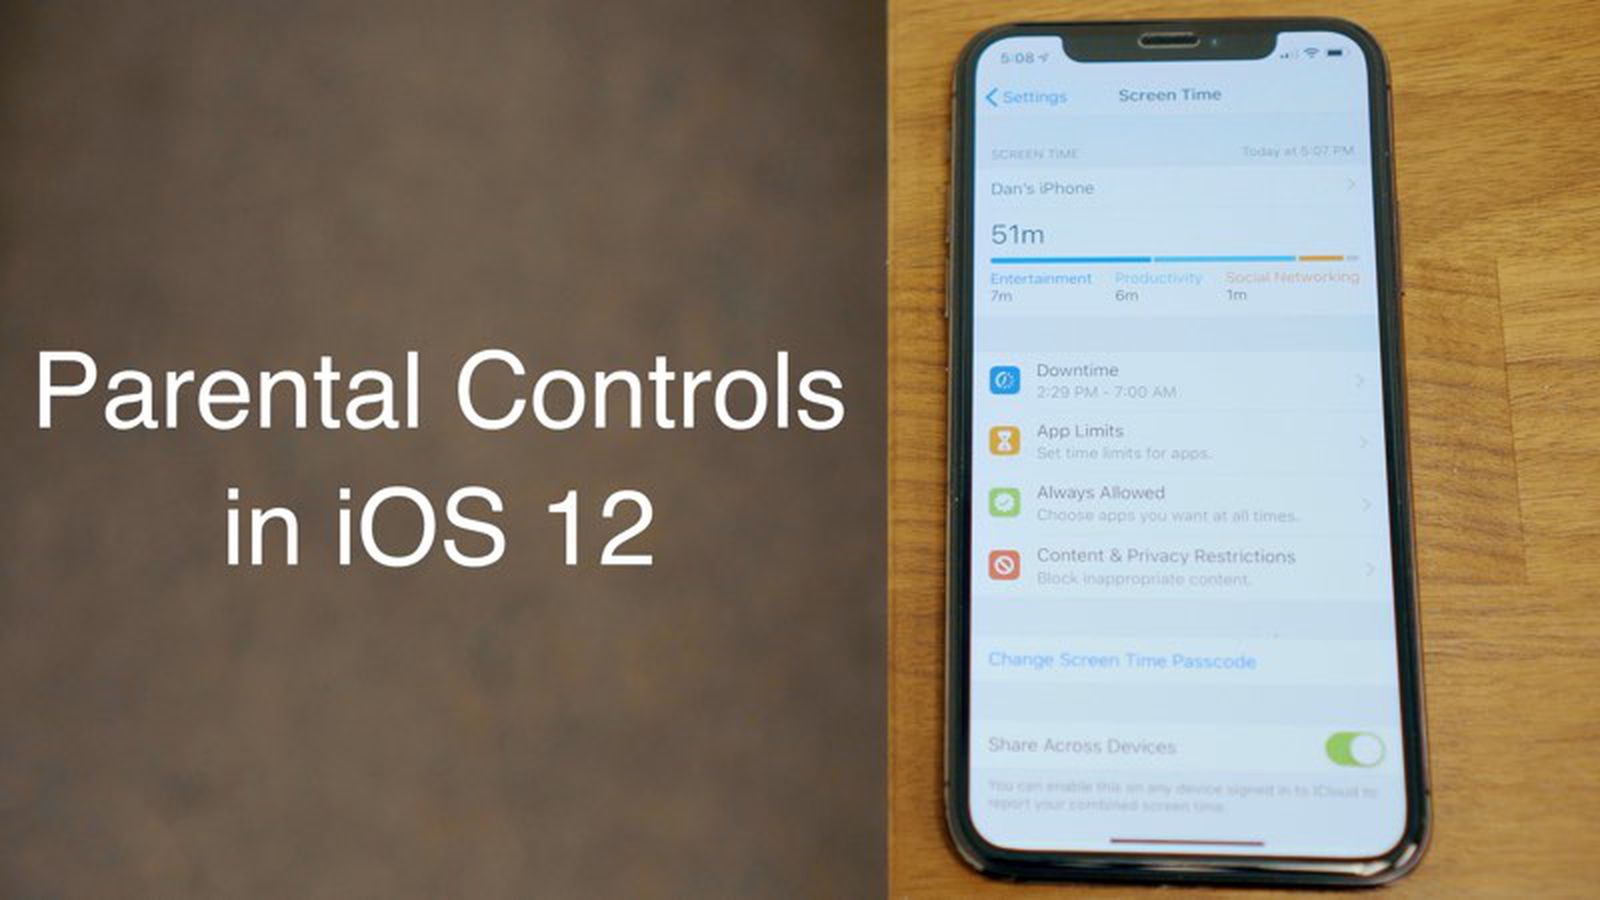 parental control software for ipad and mac